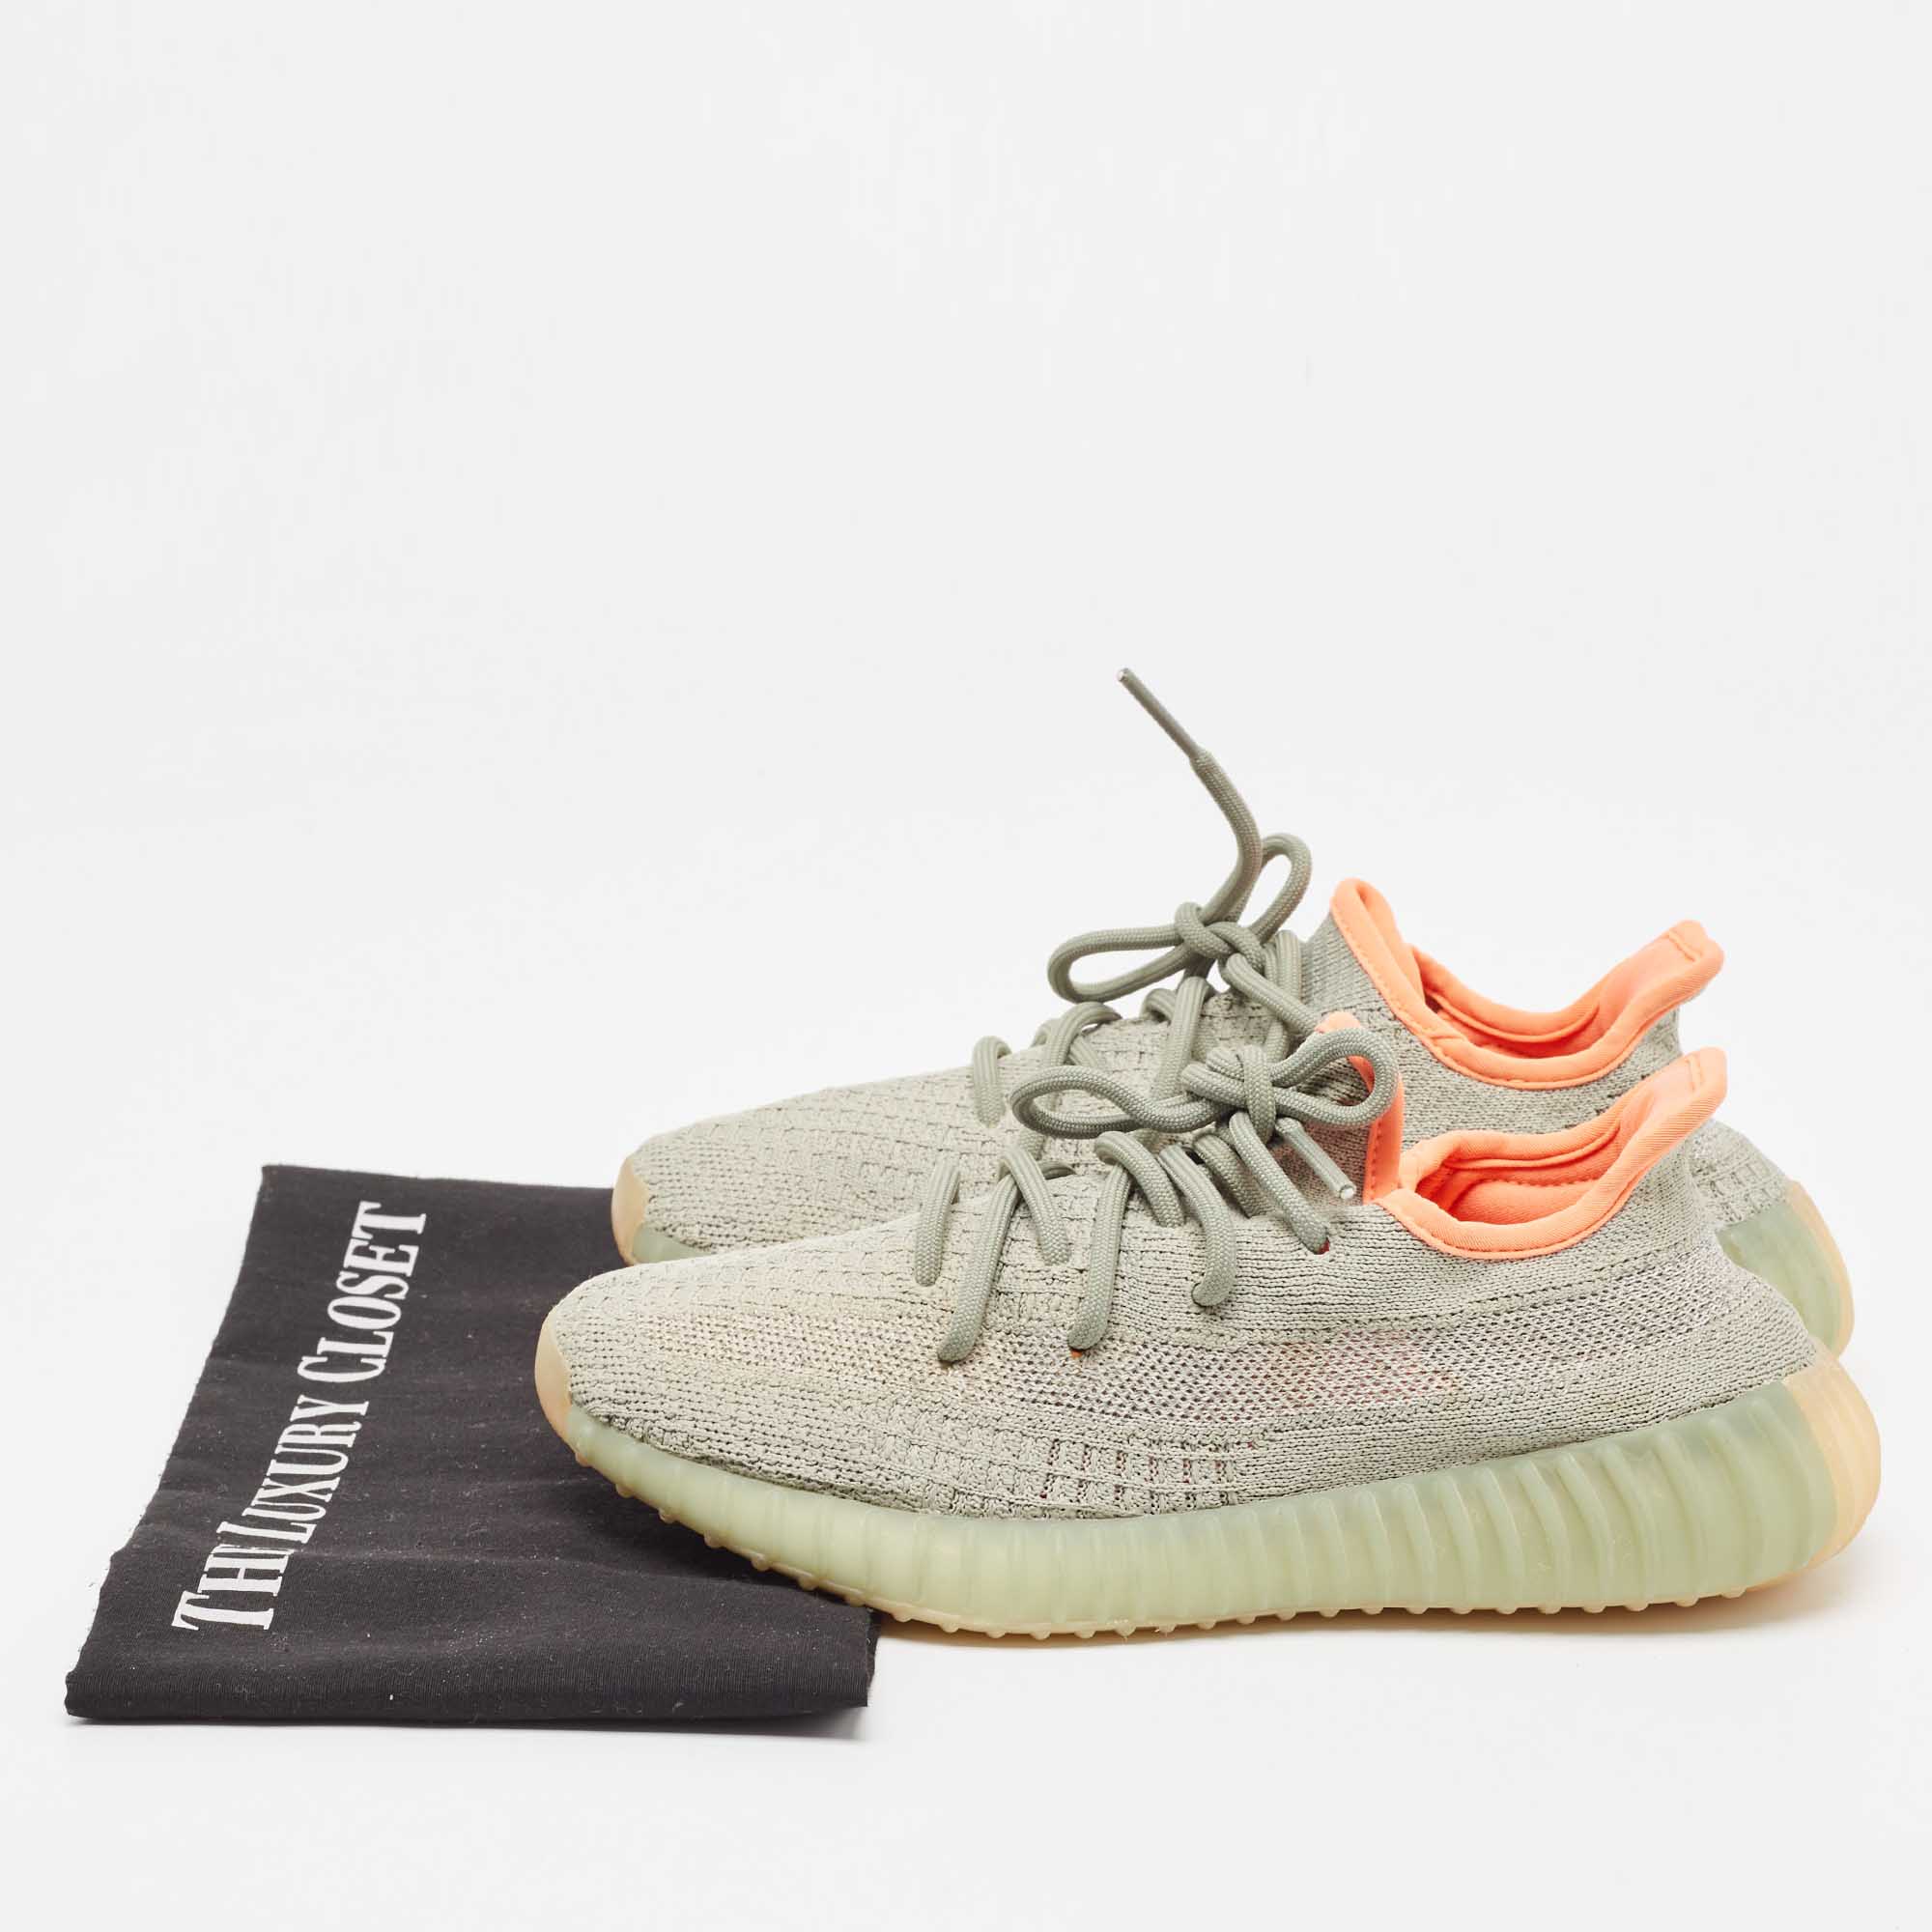 Yeezy X Adidas Grey Knit  Fabric Boost 350 V2 Sneakers Size 37 1/3